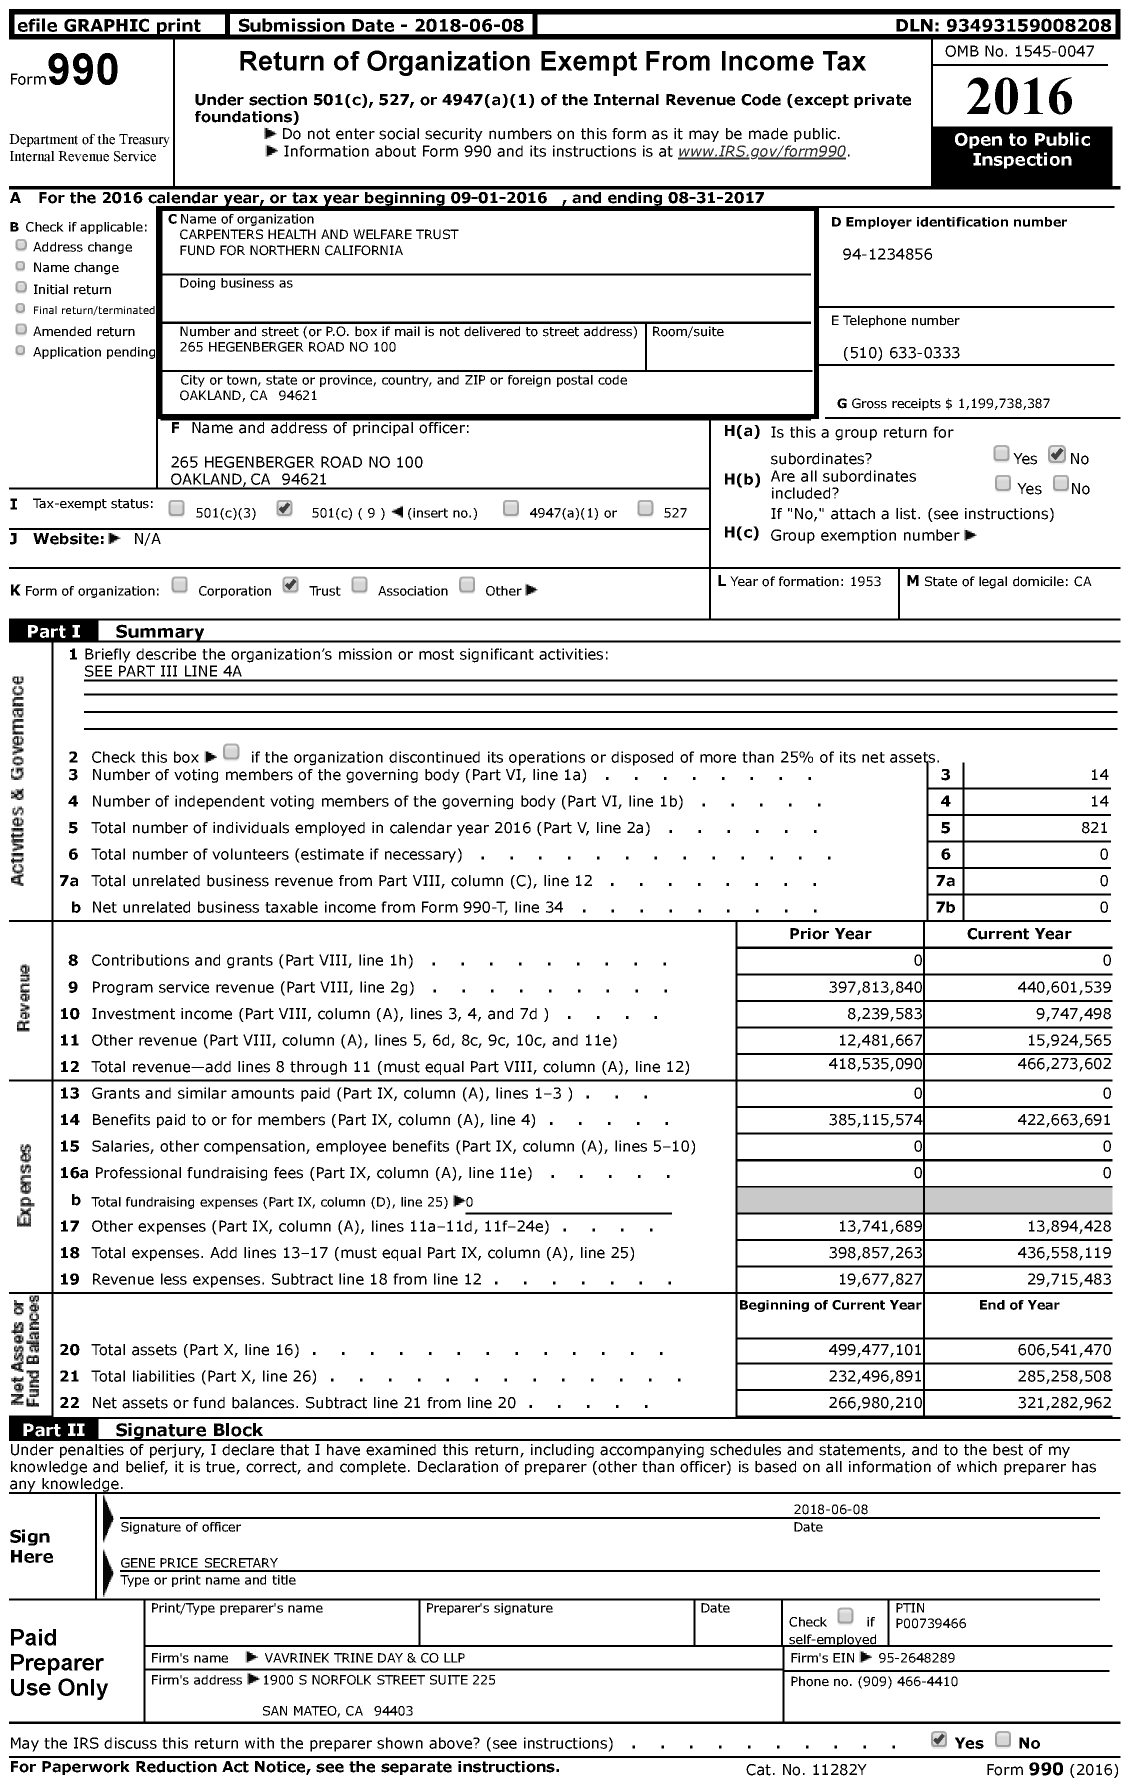 Image of first page of 2016 Form 990 for Carpenters Health and Welfare Trust Fund for Northern California